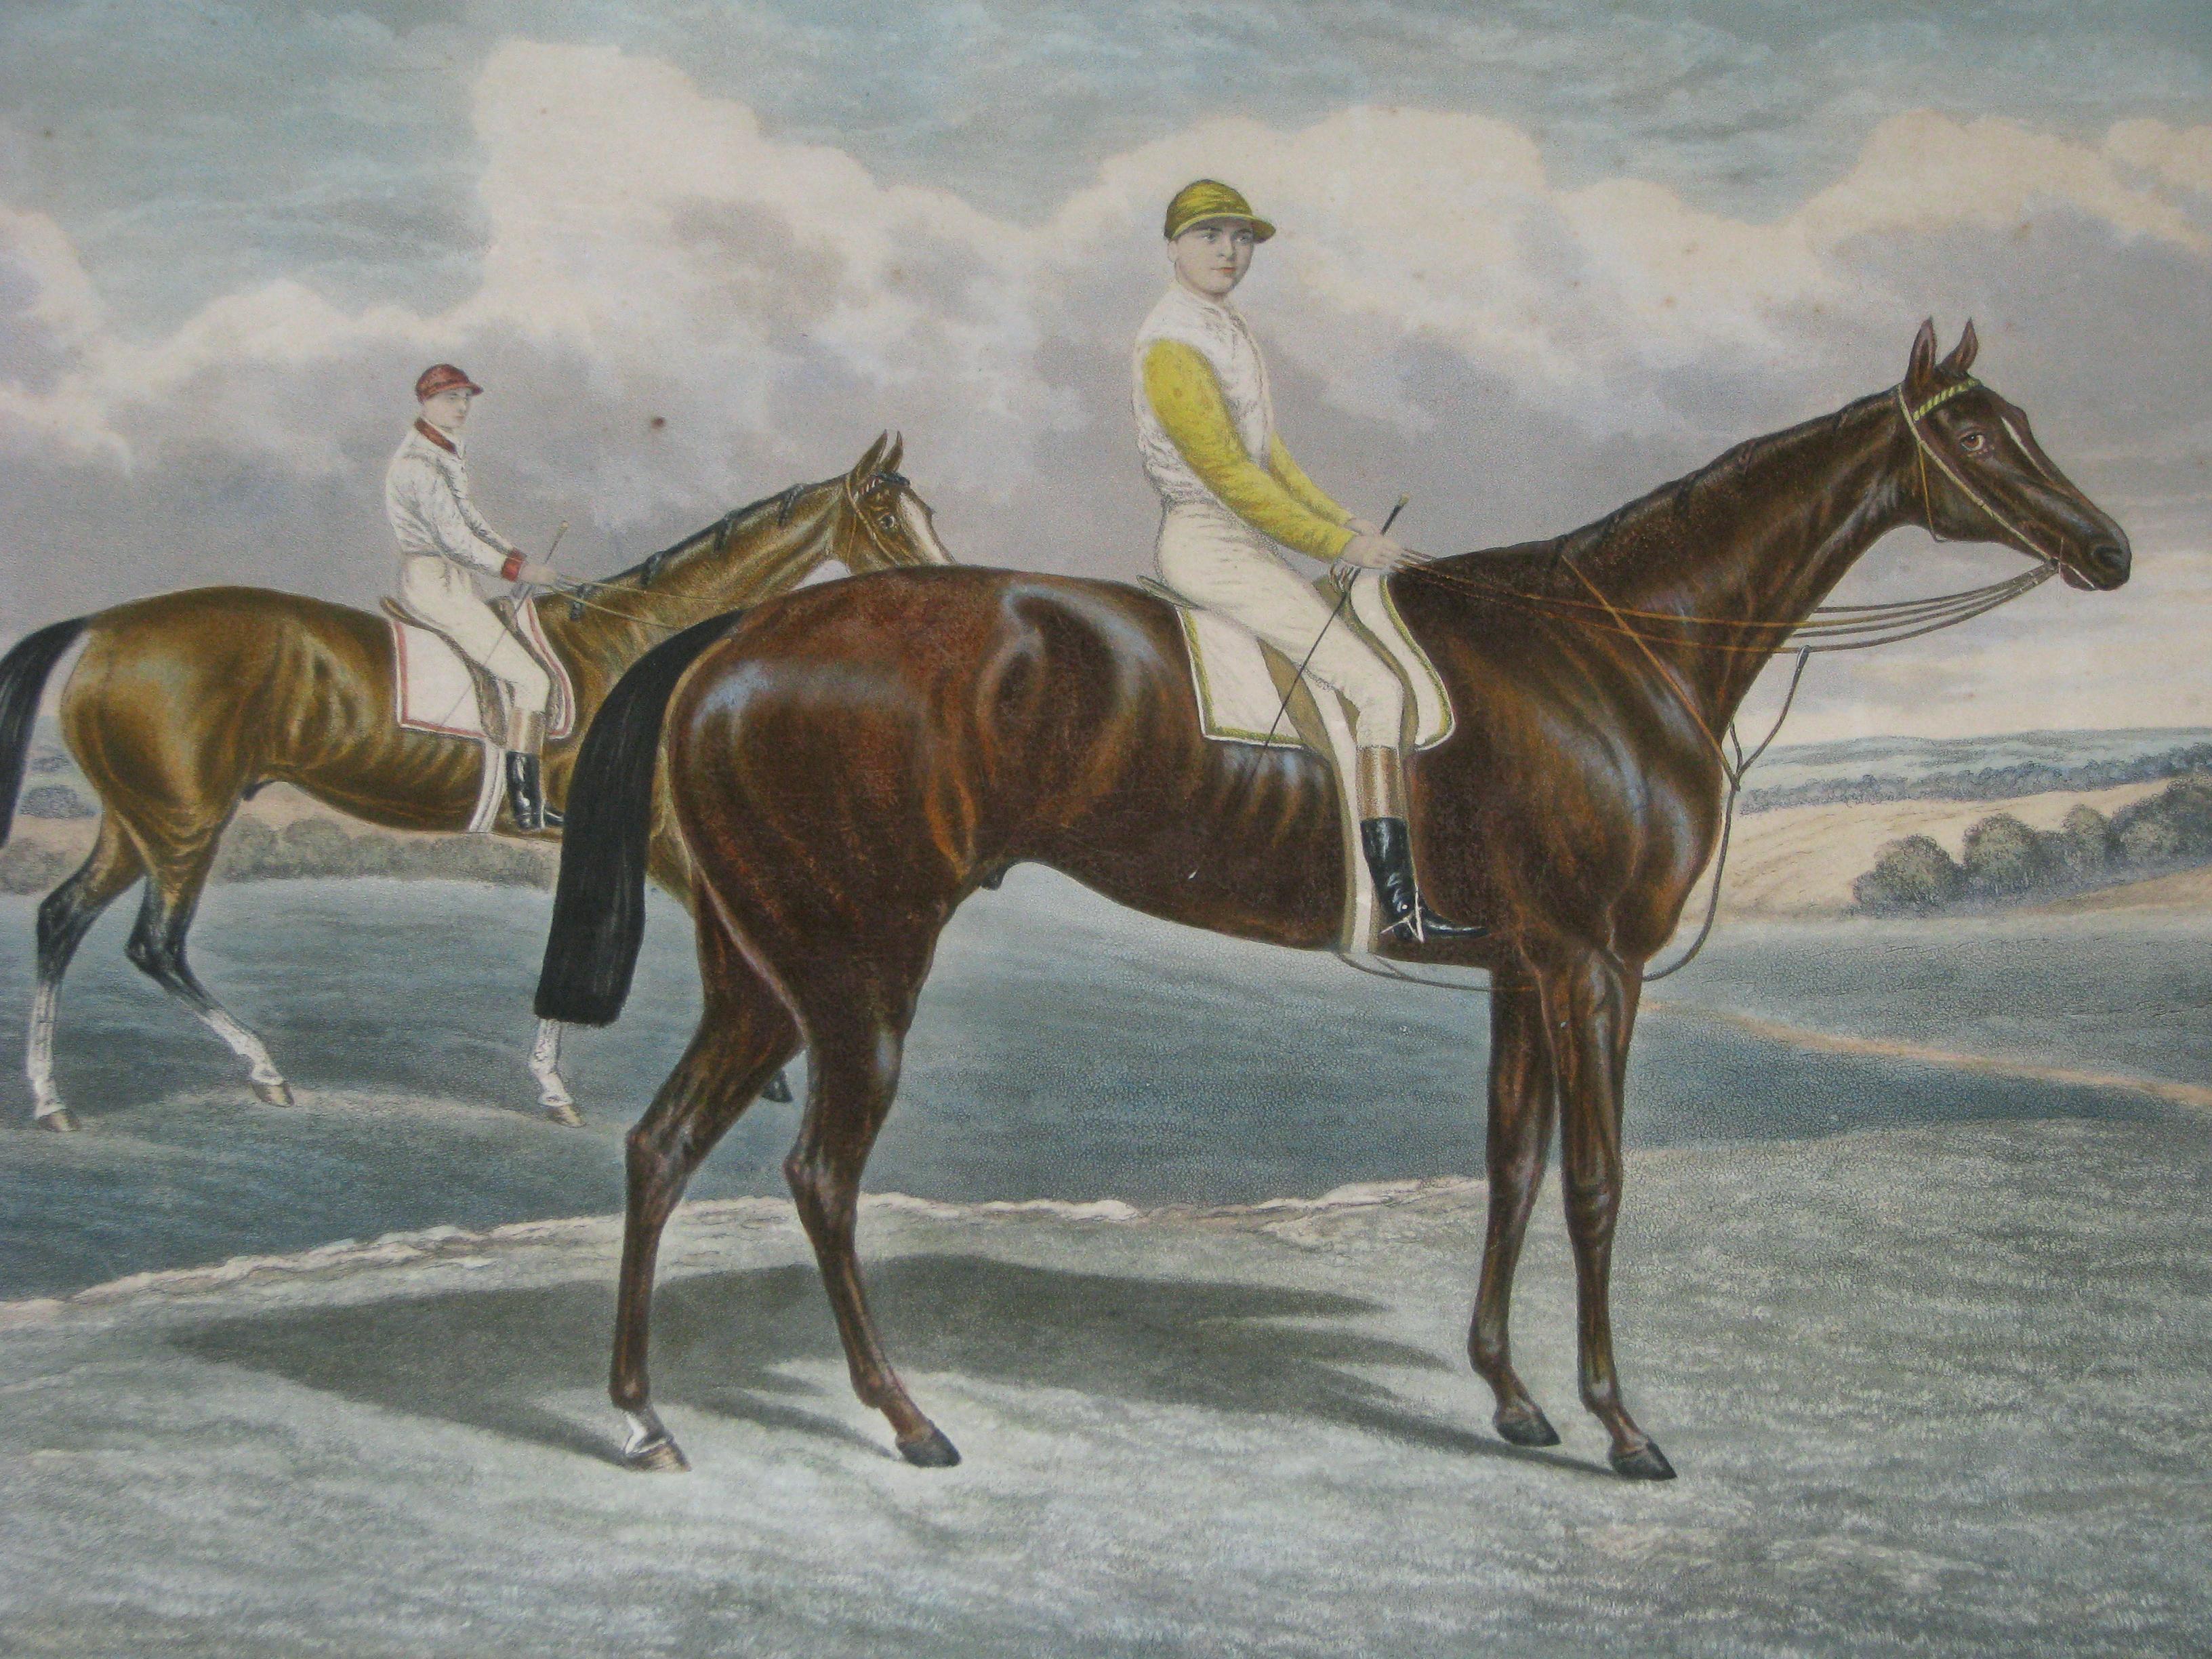 'The Dead Heat for the Derby, 1884 St. Gatien and Harvester'
A large scale equestrian racing print by E. H. Hunt after the original painting by R. Powell.
Published in London, 1884.
Presented in a birds' eye maple frame.

The Derby is Britain's